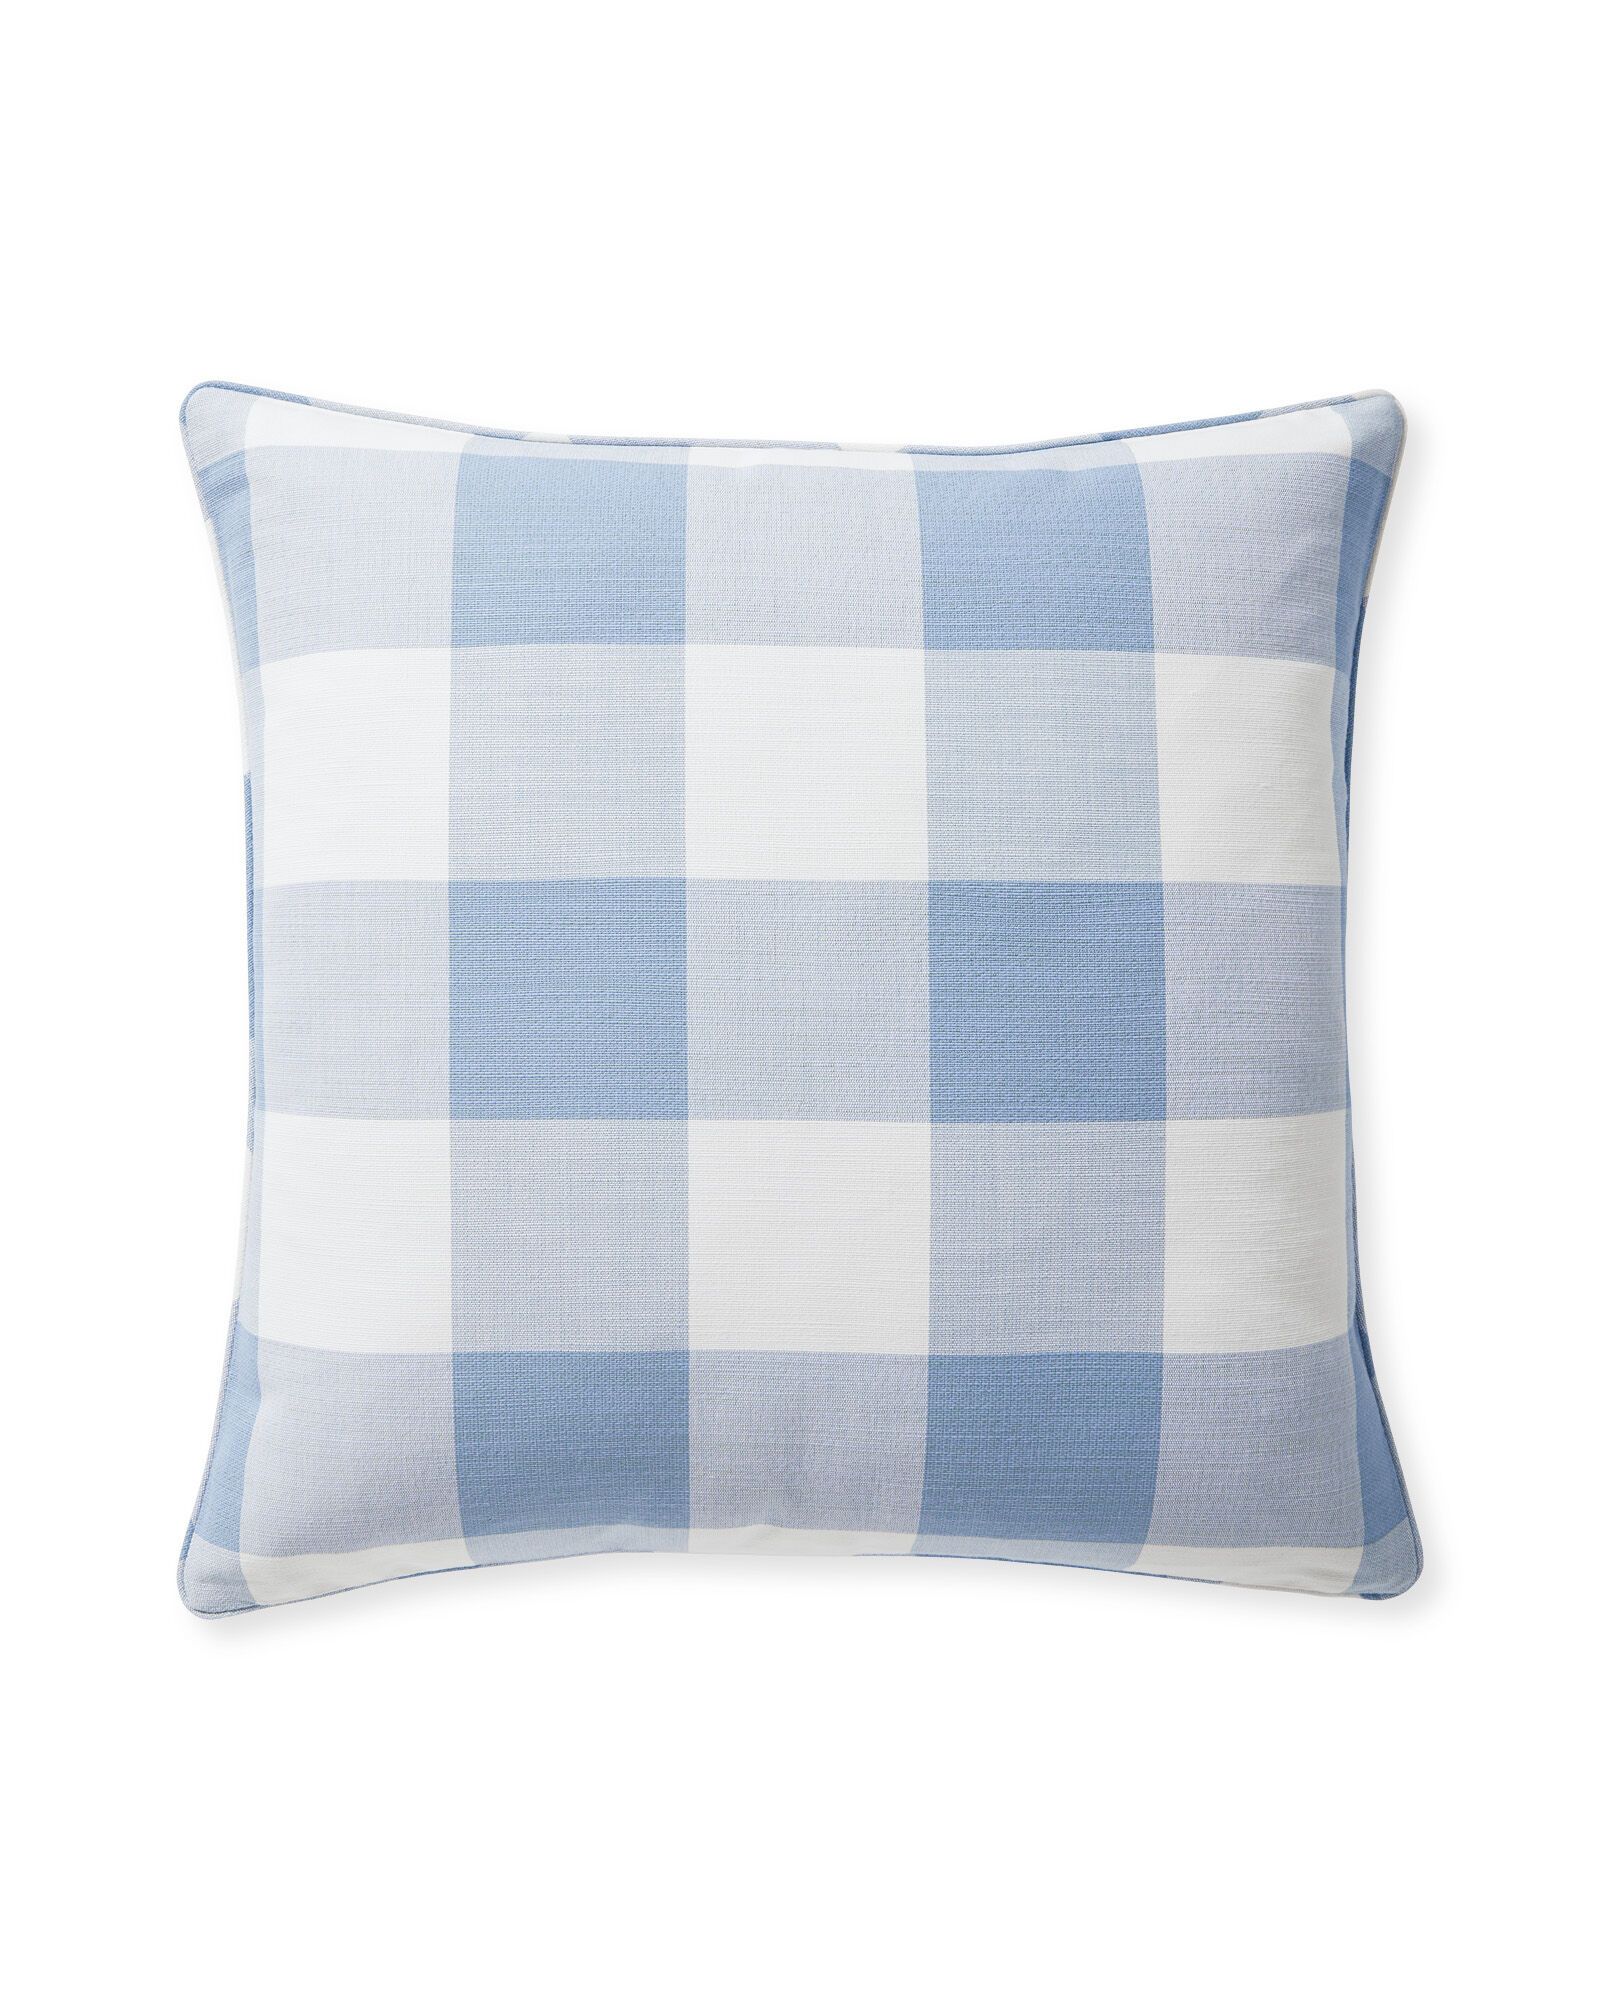 Perennials® Gingham Pillow Cover | Serena and Lily